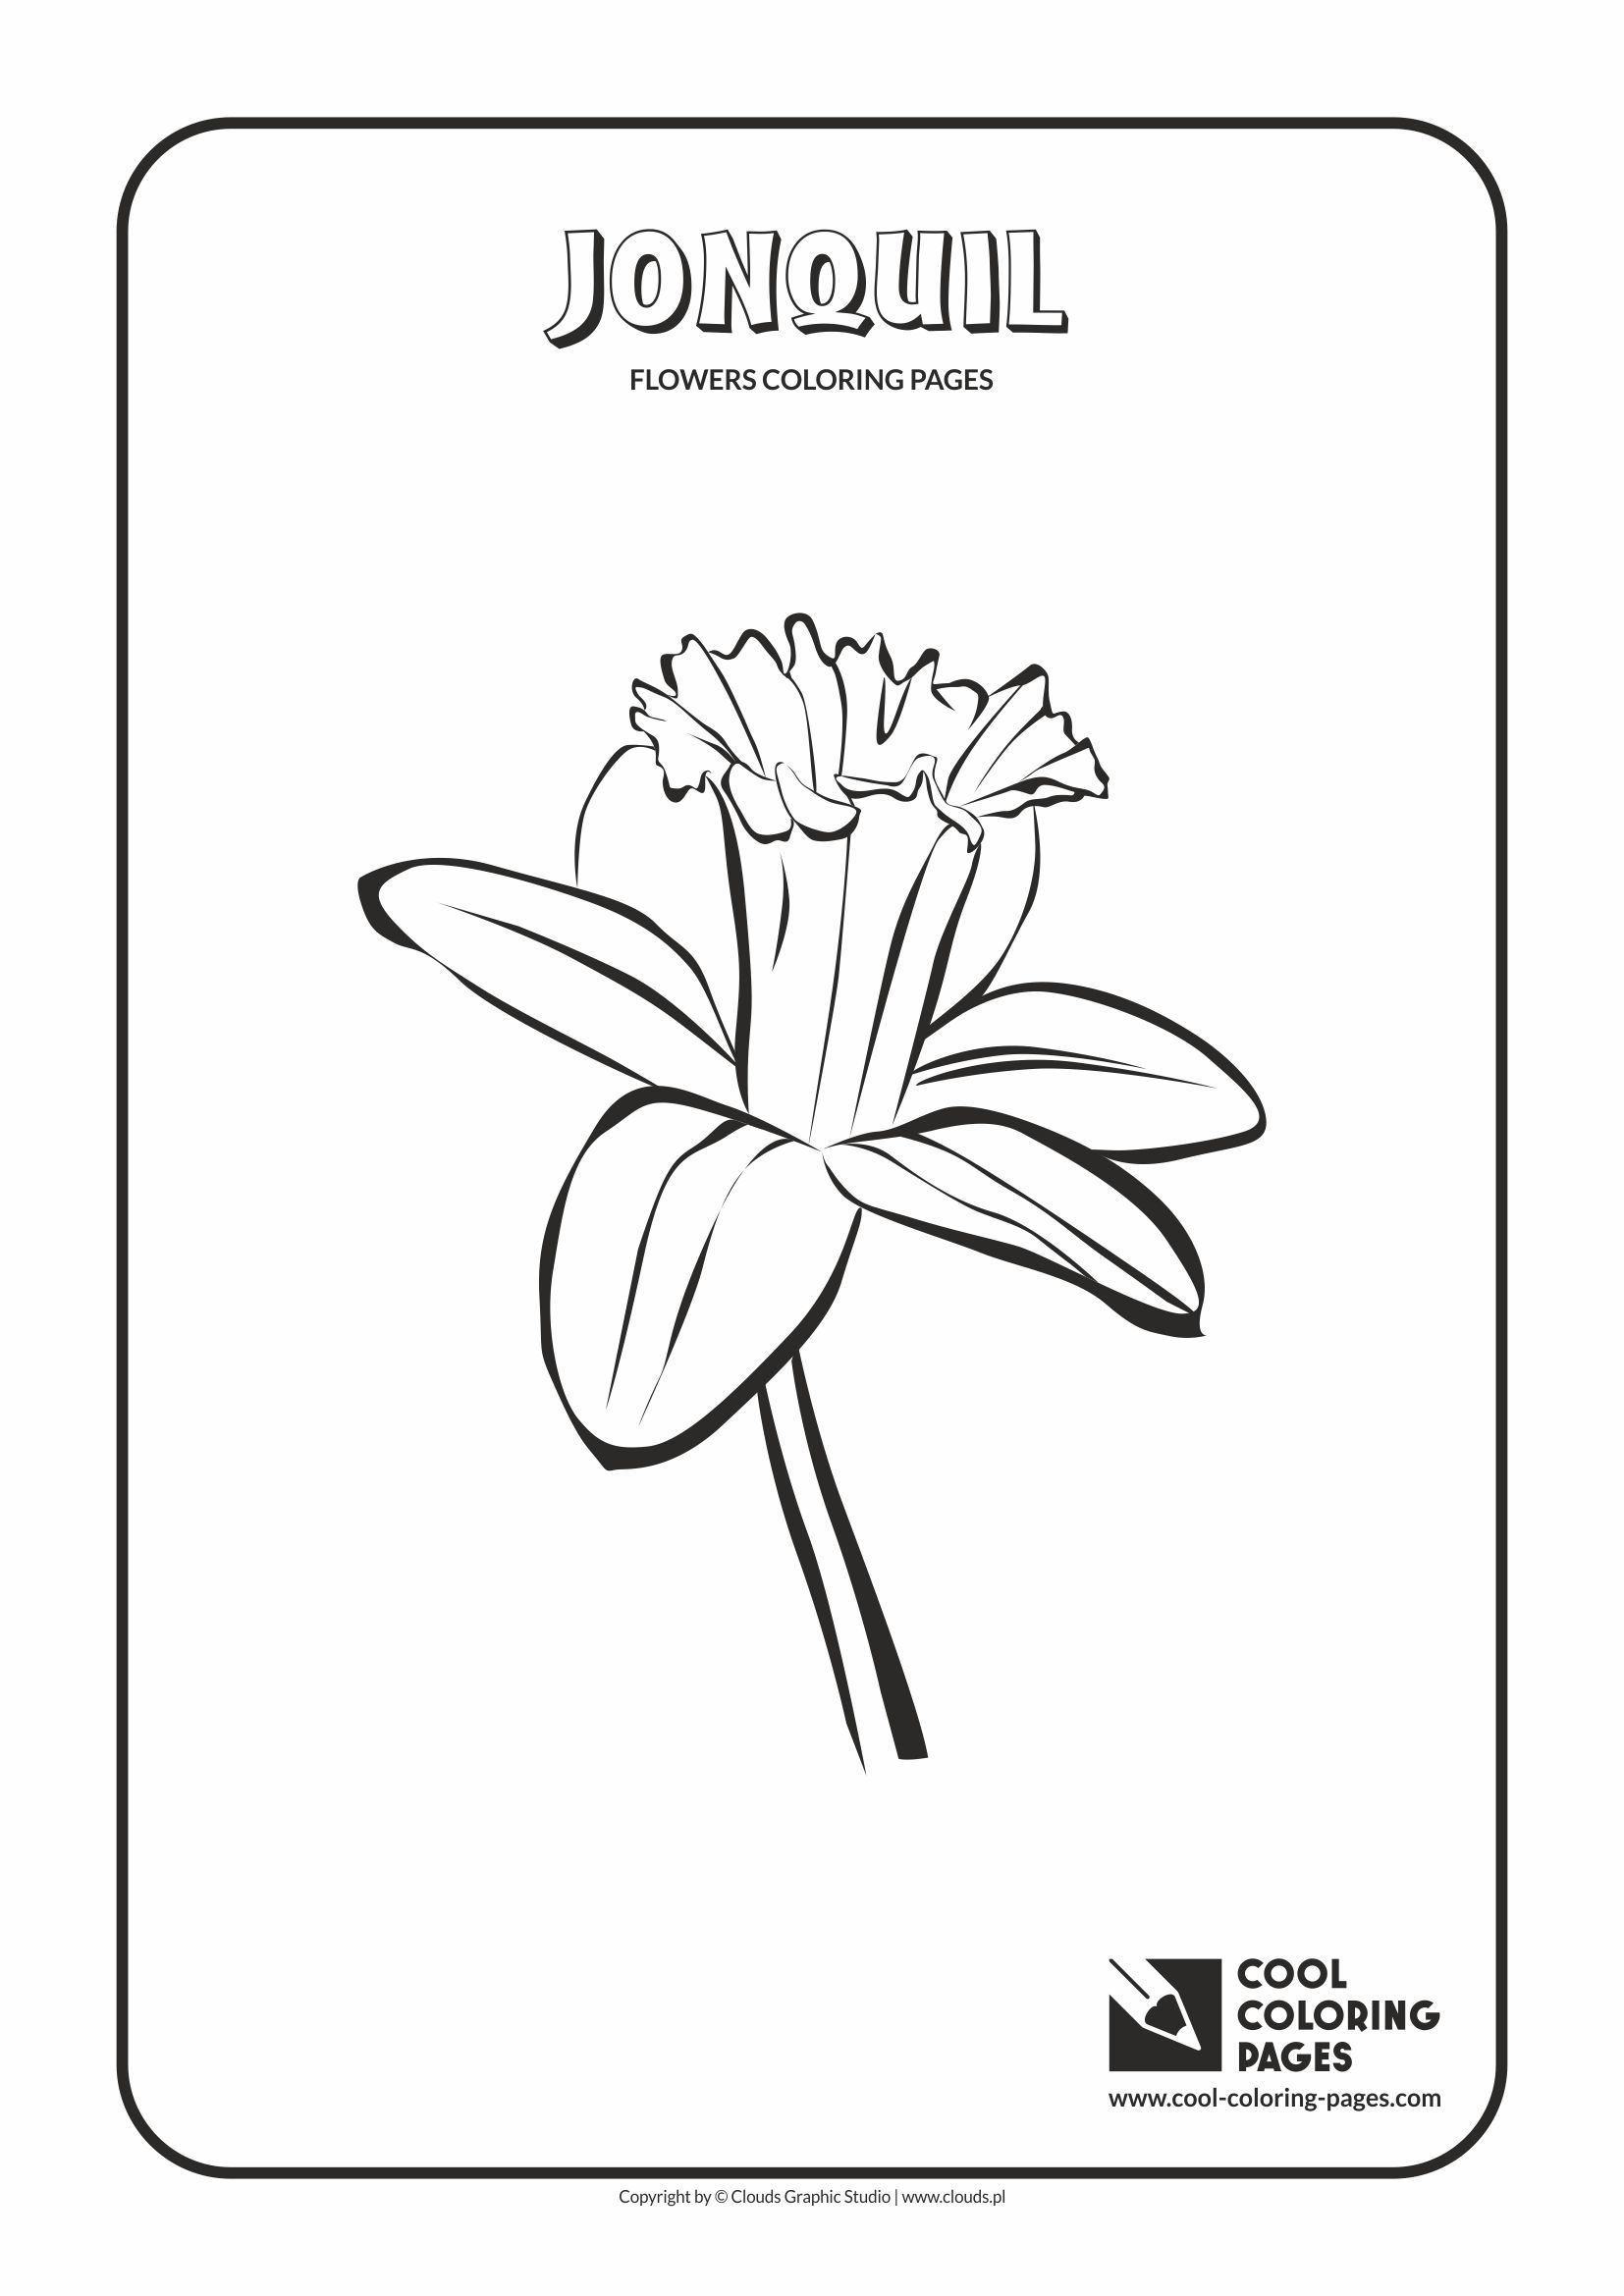 Cool Coloring Pages - Plants / Jonquil / Coloring page with jonquil